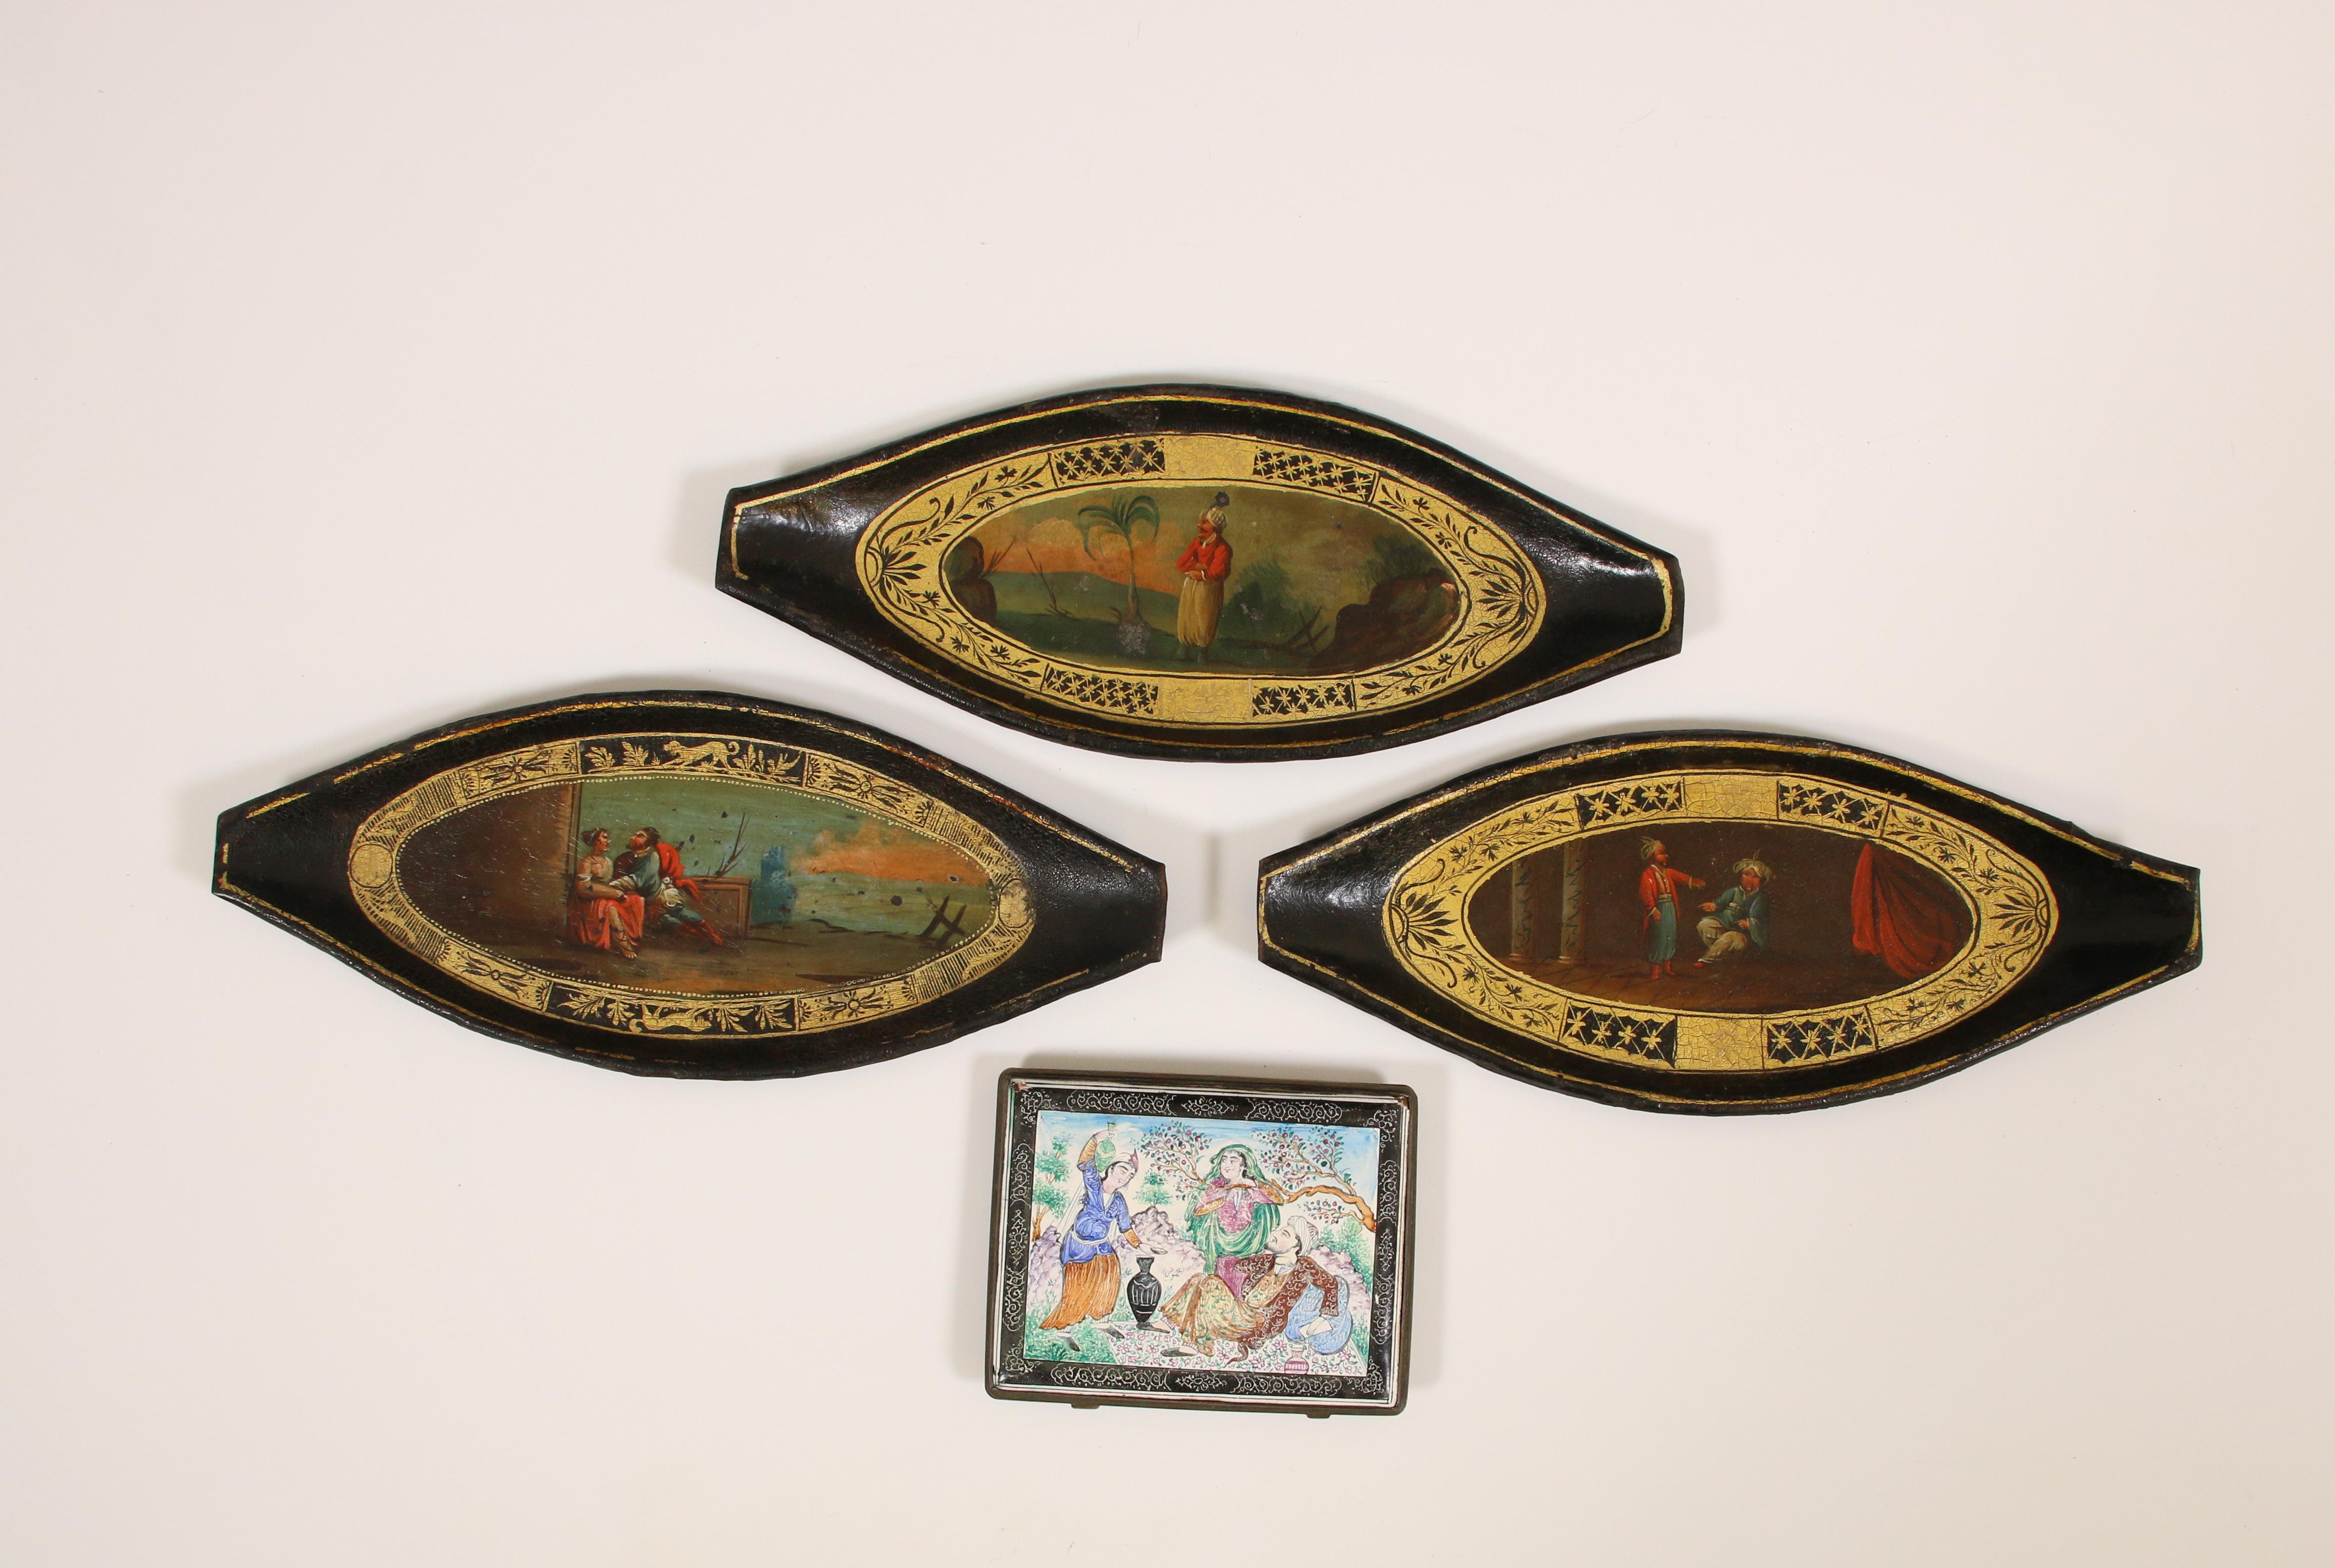 Persia, three lacquered and painted tin oval dishes, 19th century